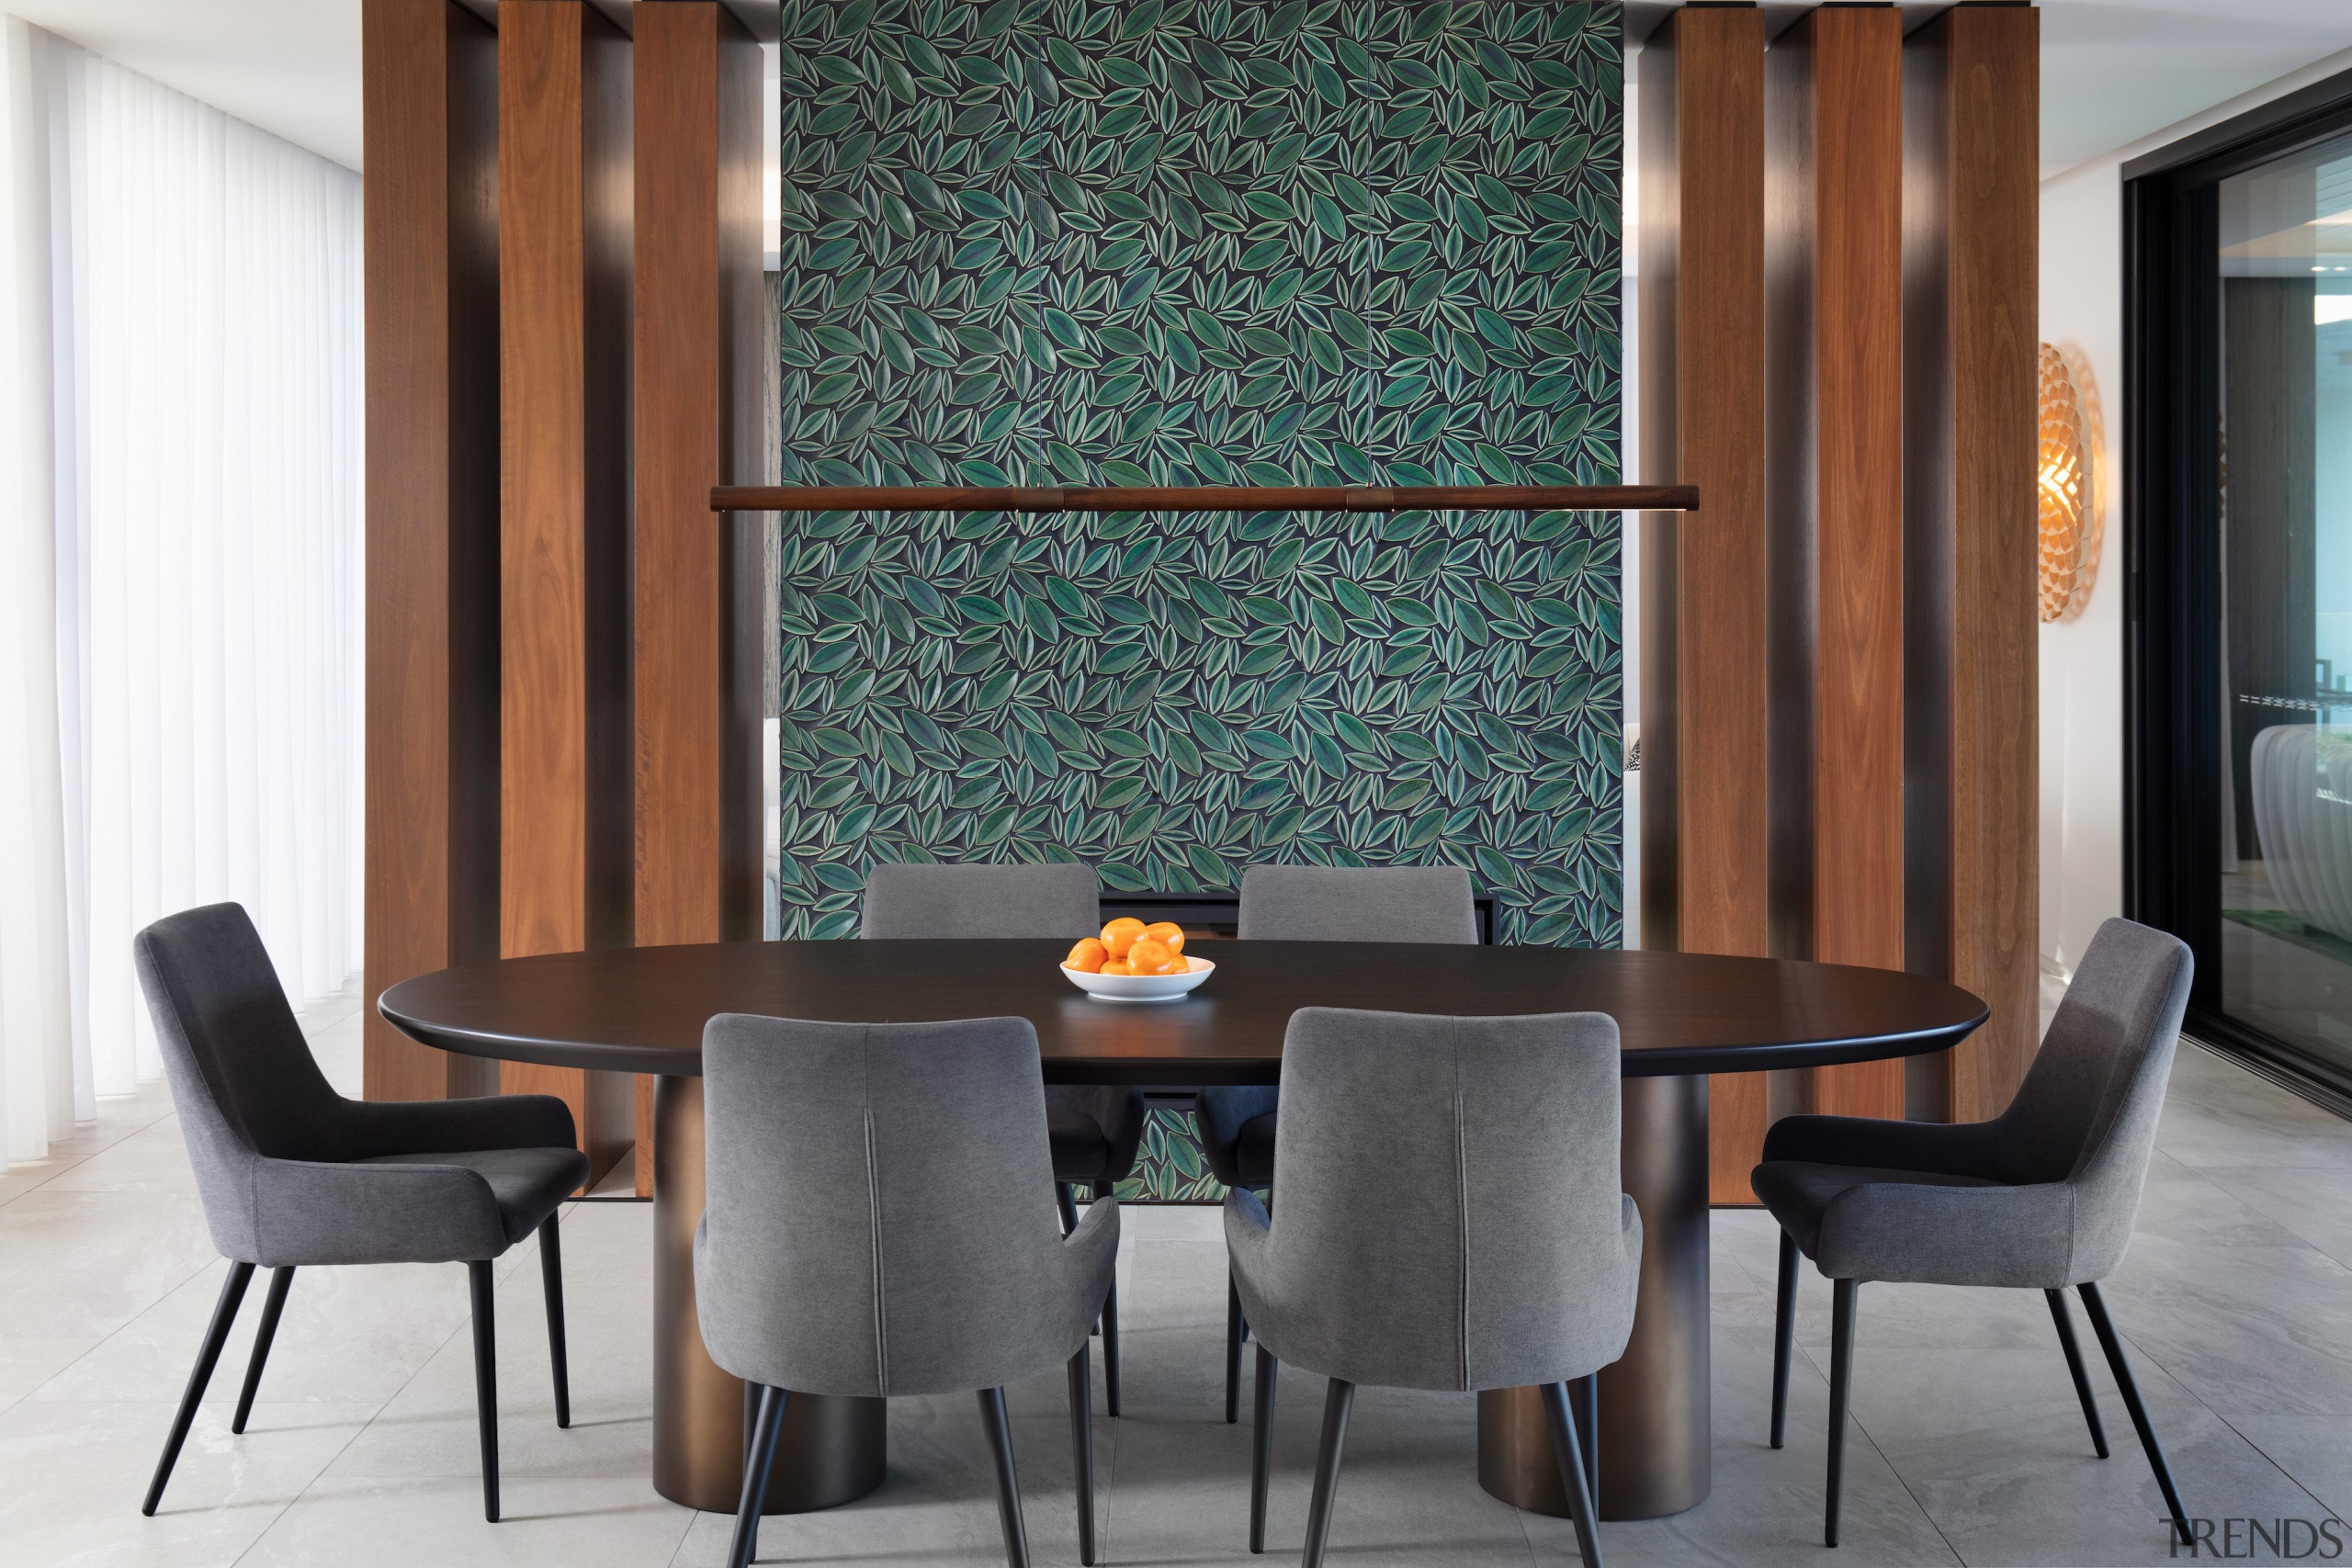 A feature tiled mosaic wall stands between dining 